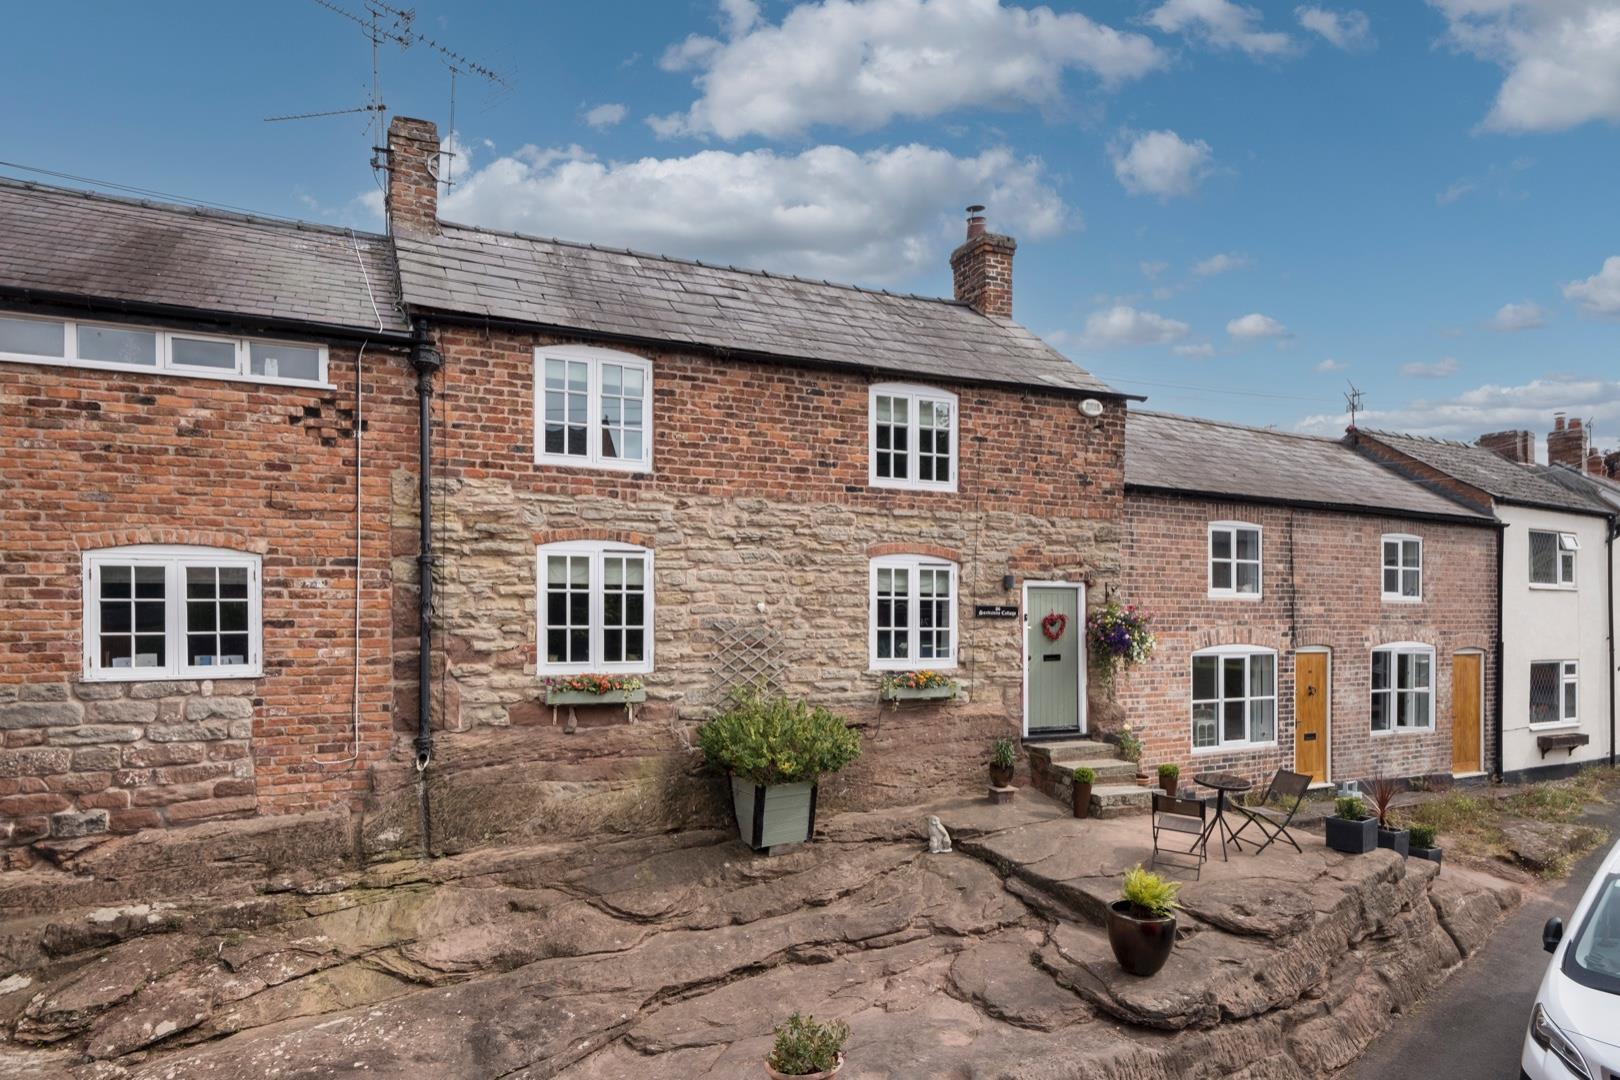 3 bedroom  Terraced Other for Sale in Tarvin